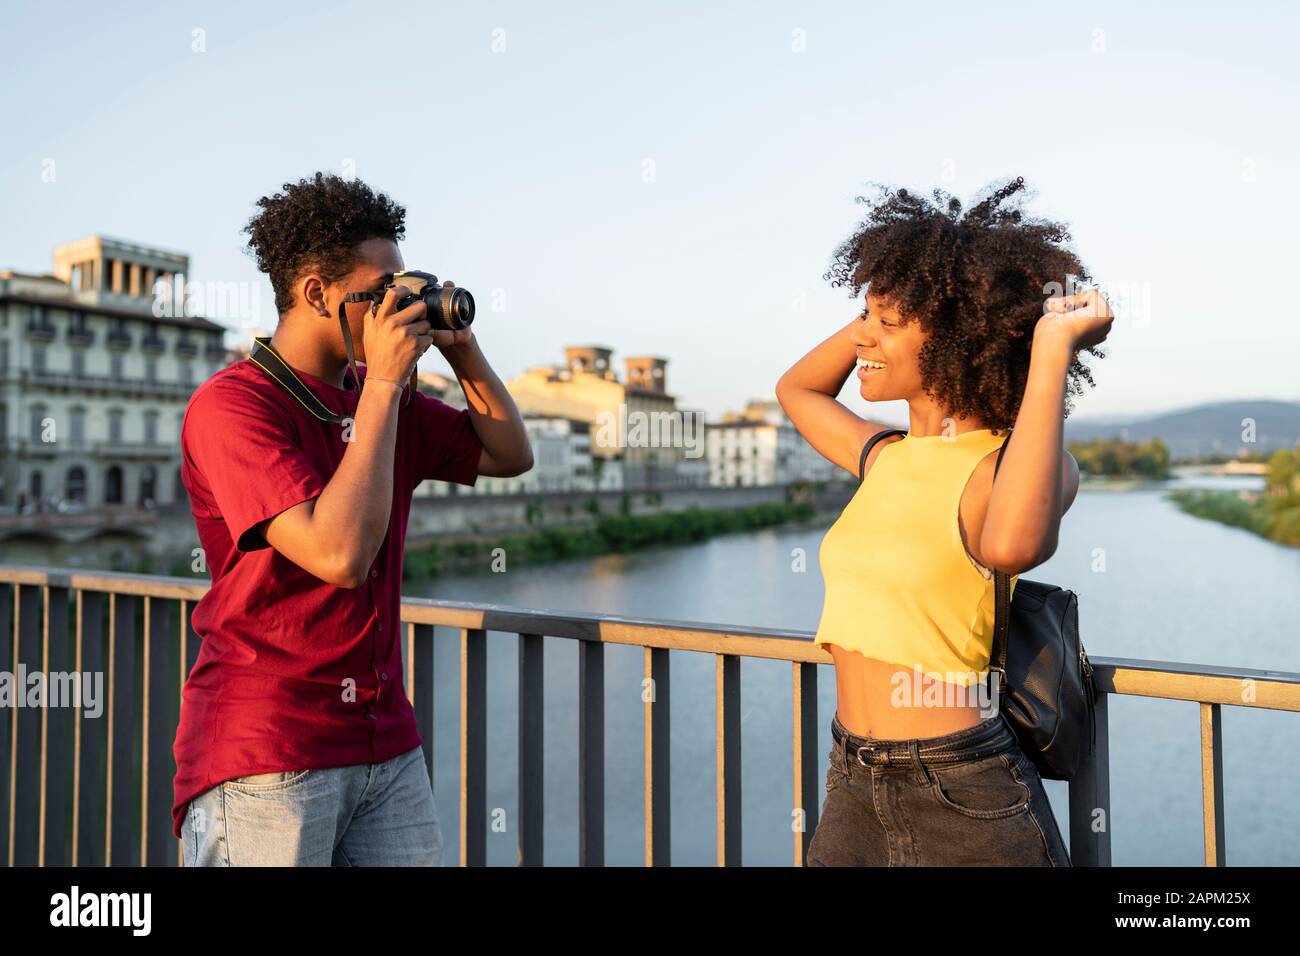 Young man taking a picture of his girlfriend on a bridge above river Arno at sunset, Florence, Italy Stock Photo